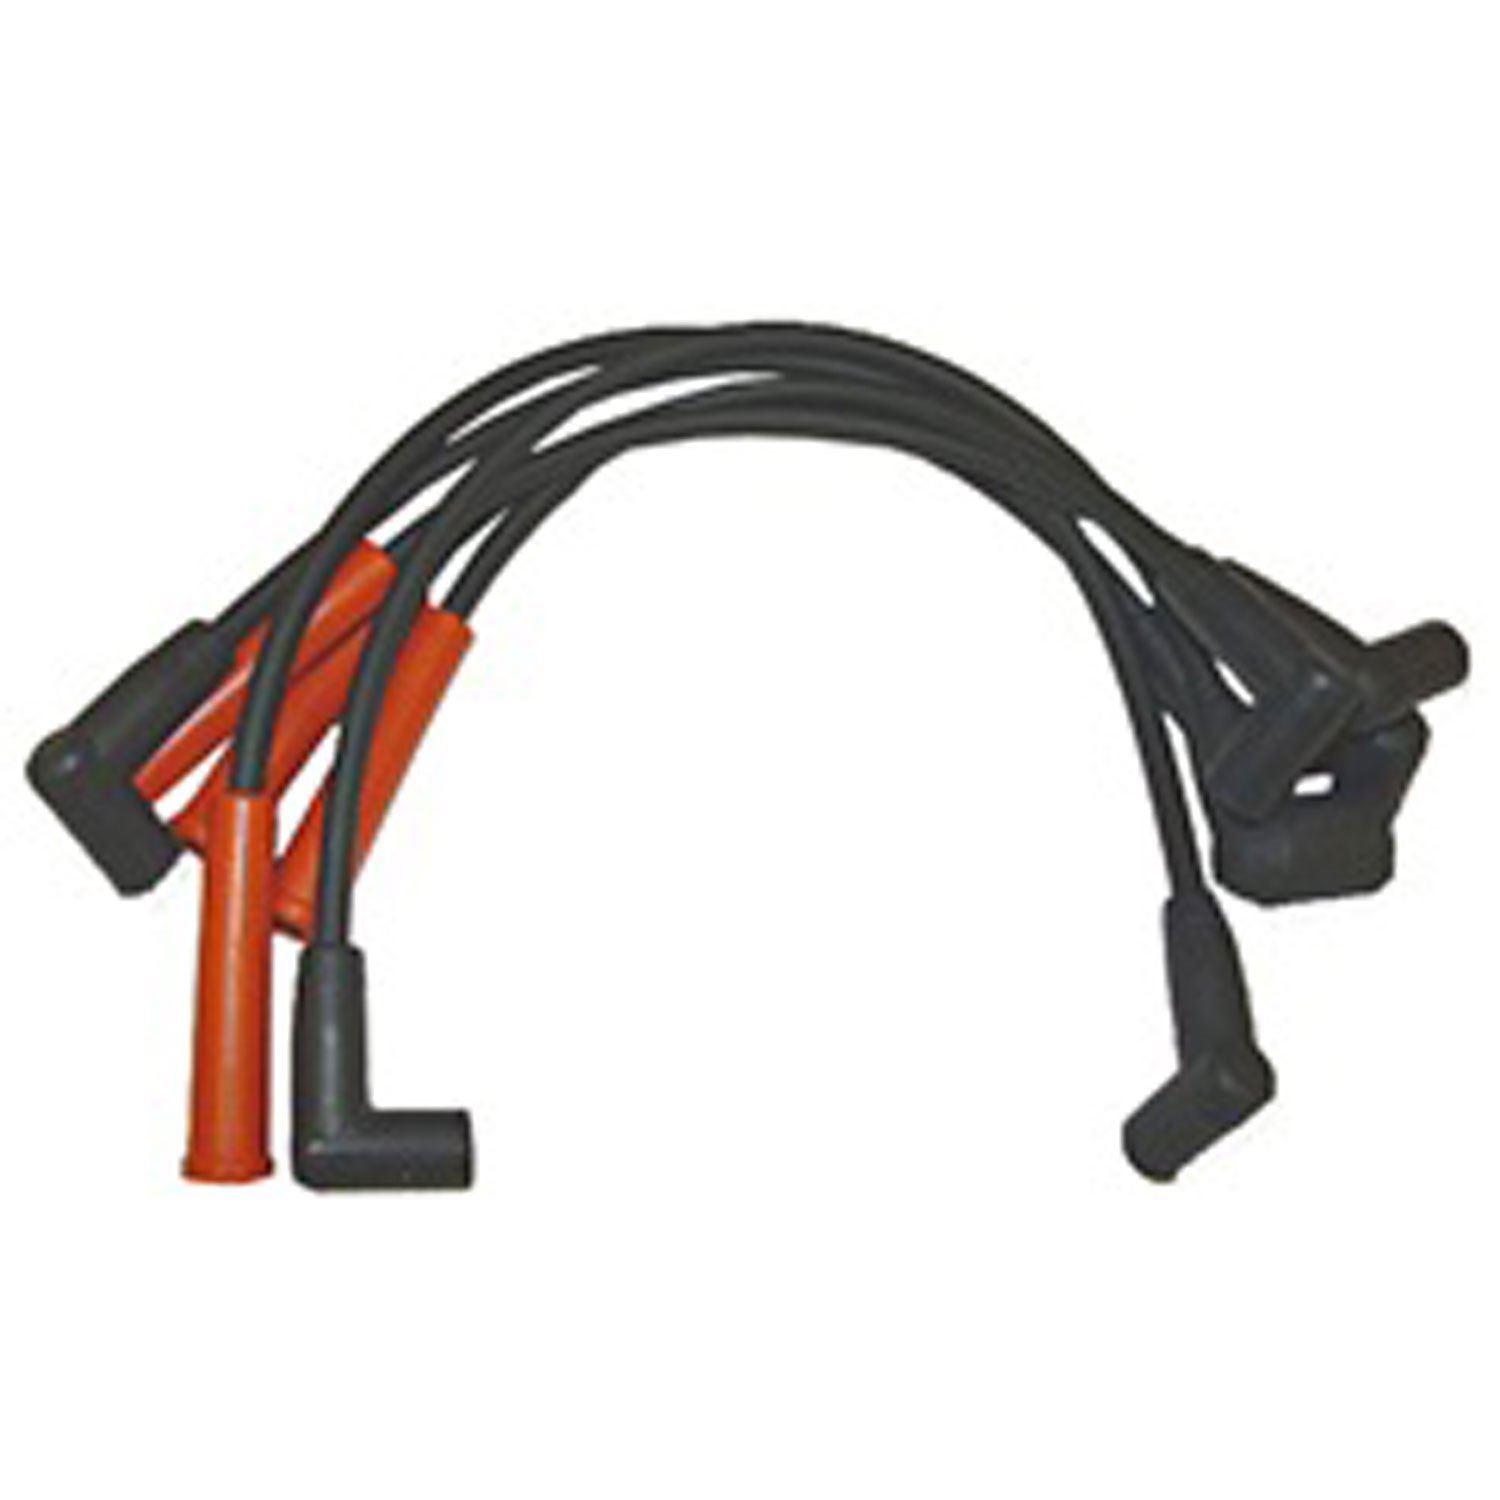 This ignition wire set from Omix-ADA fits the 2.5L engine found in 91-00 Jeep Cherokees and 91-02 Wranglers.